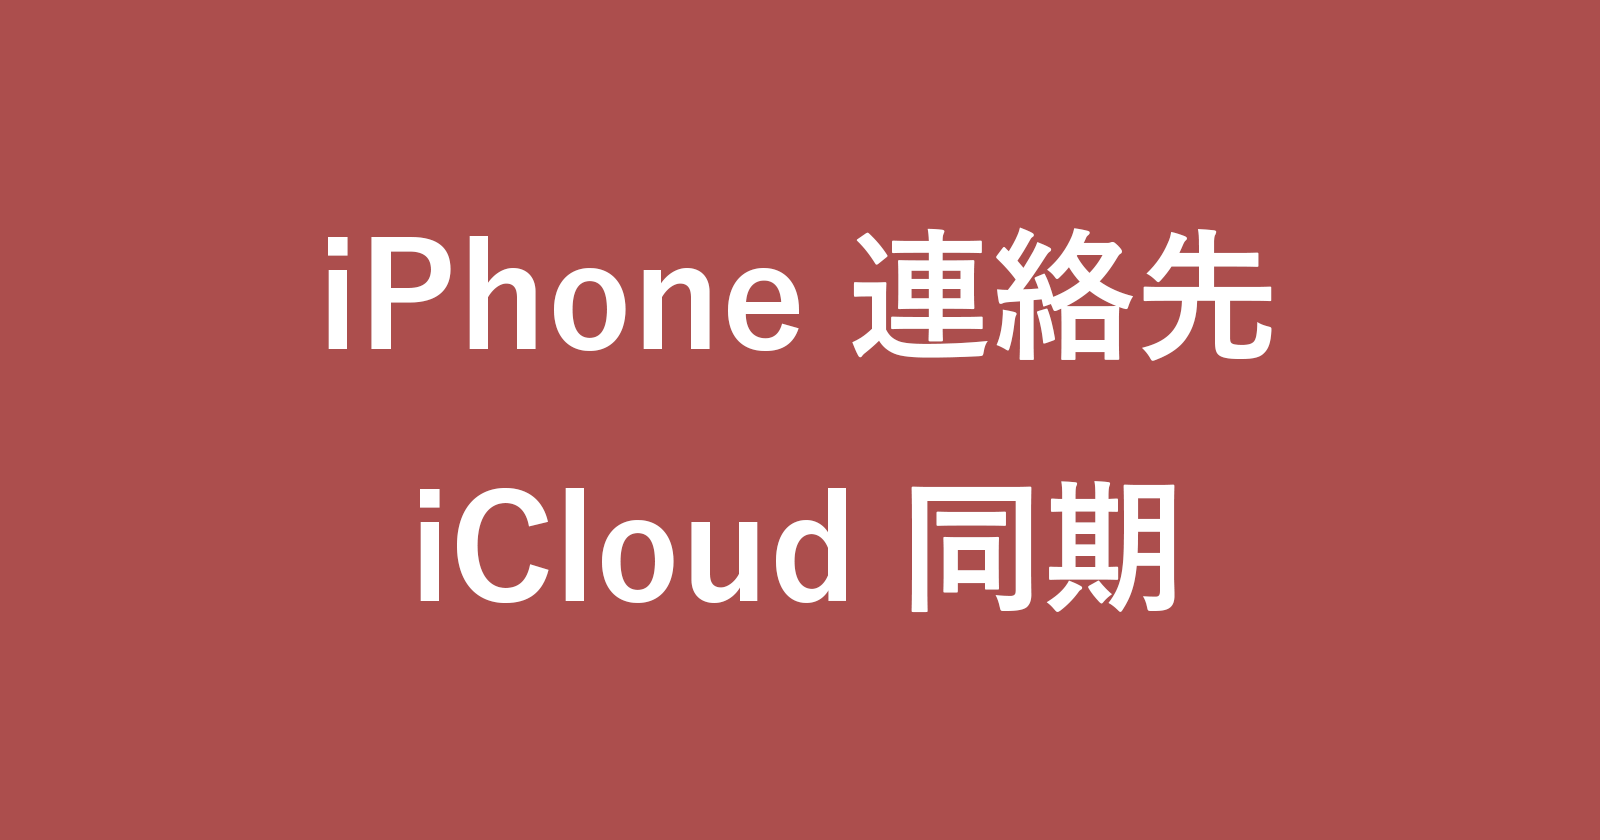 iphone contacts icloud sync